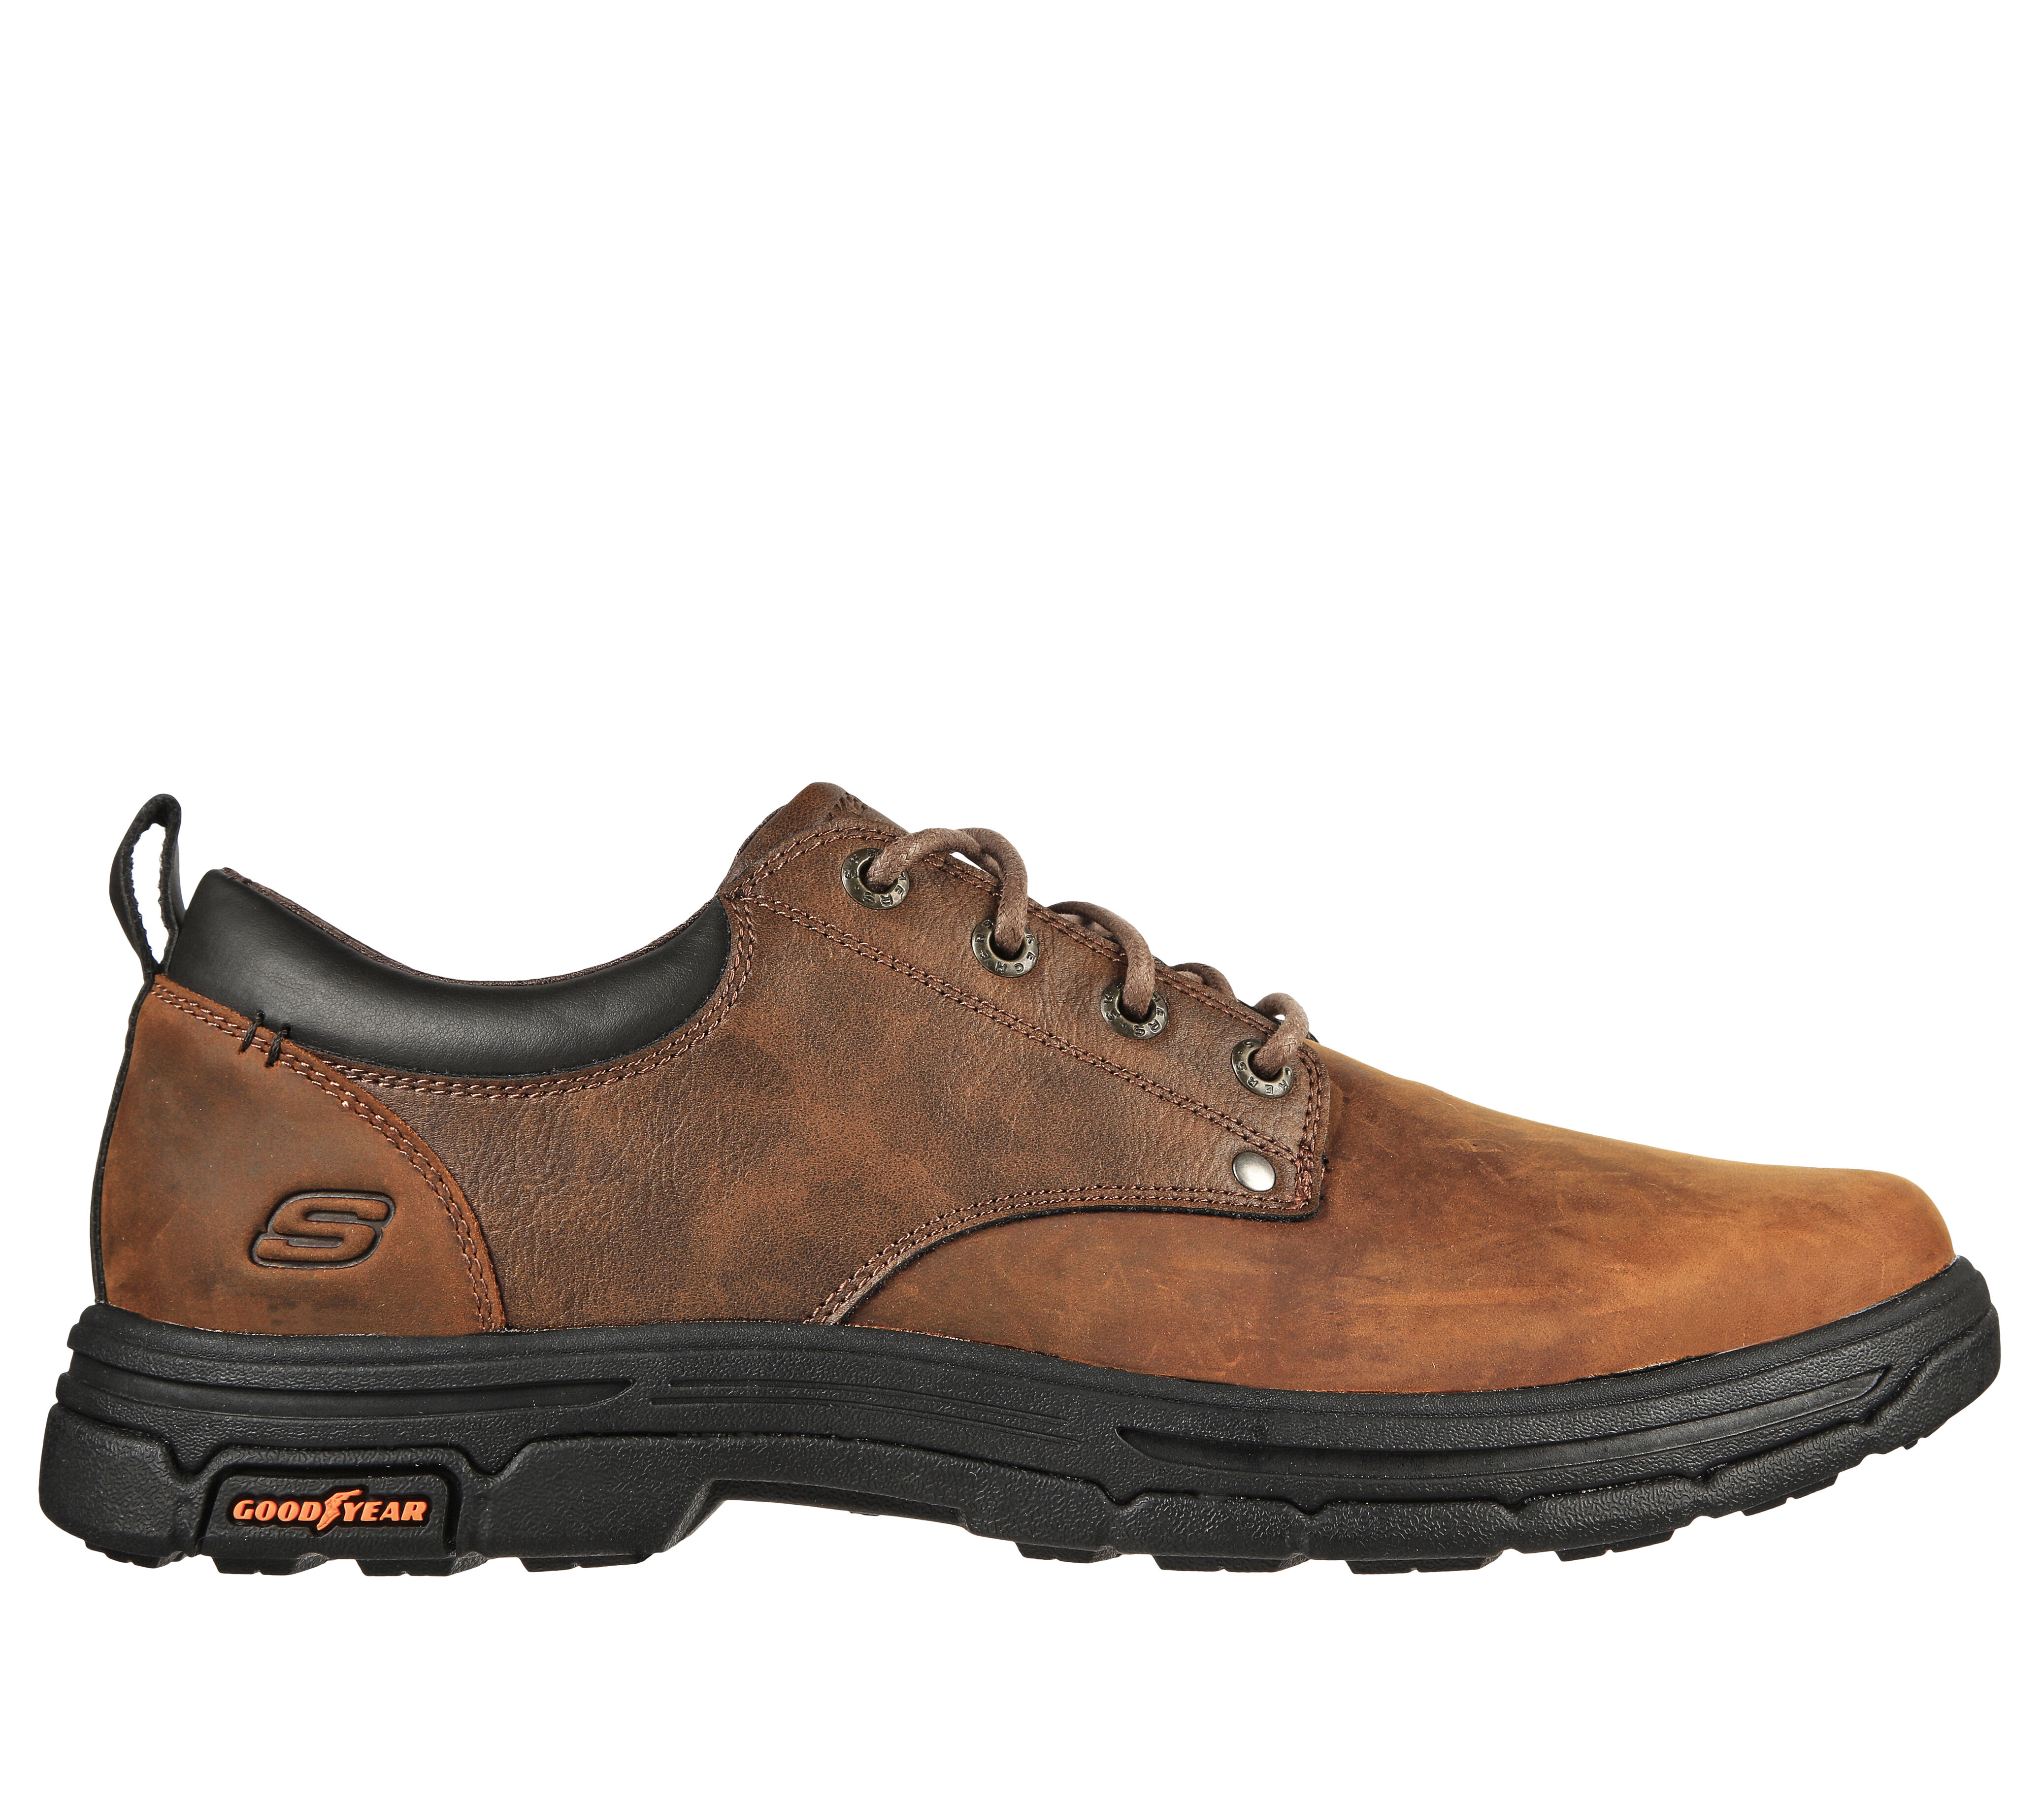 mens leather skechers shoes